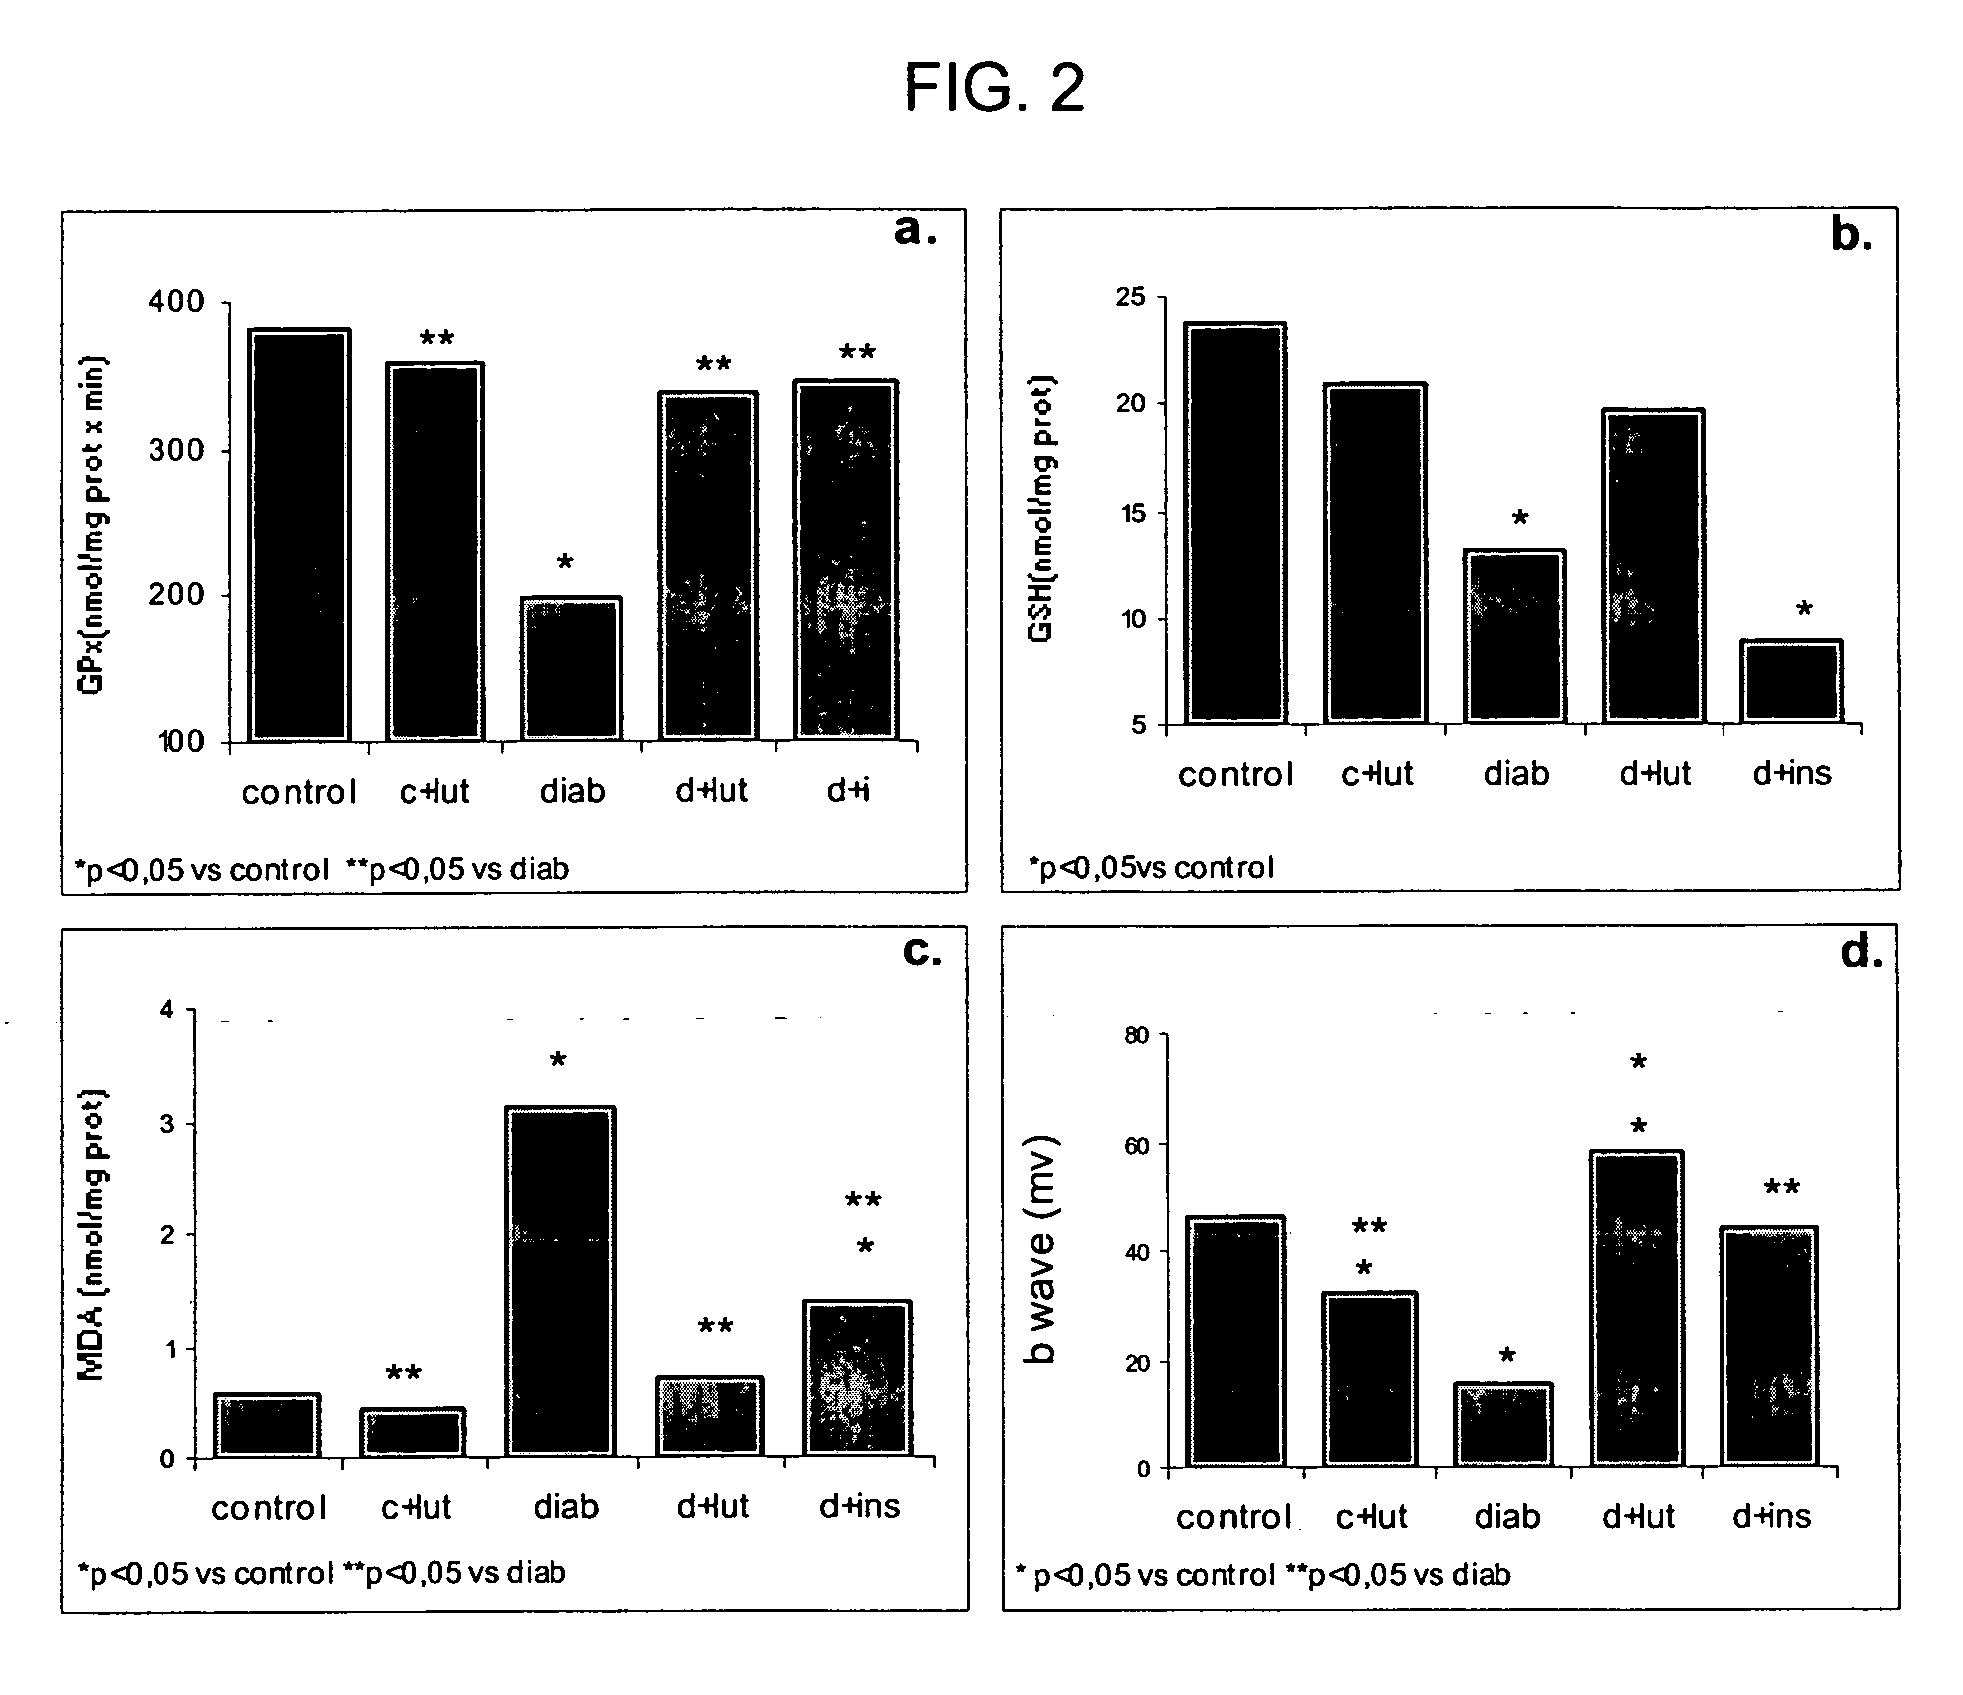 Method of using carotenoids in the prevention of cognitive decline and for other neuroprotection functions